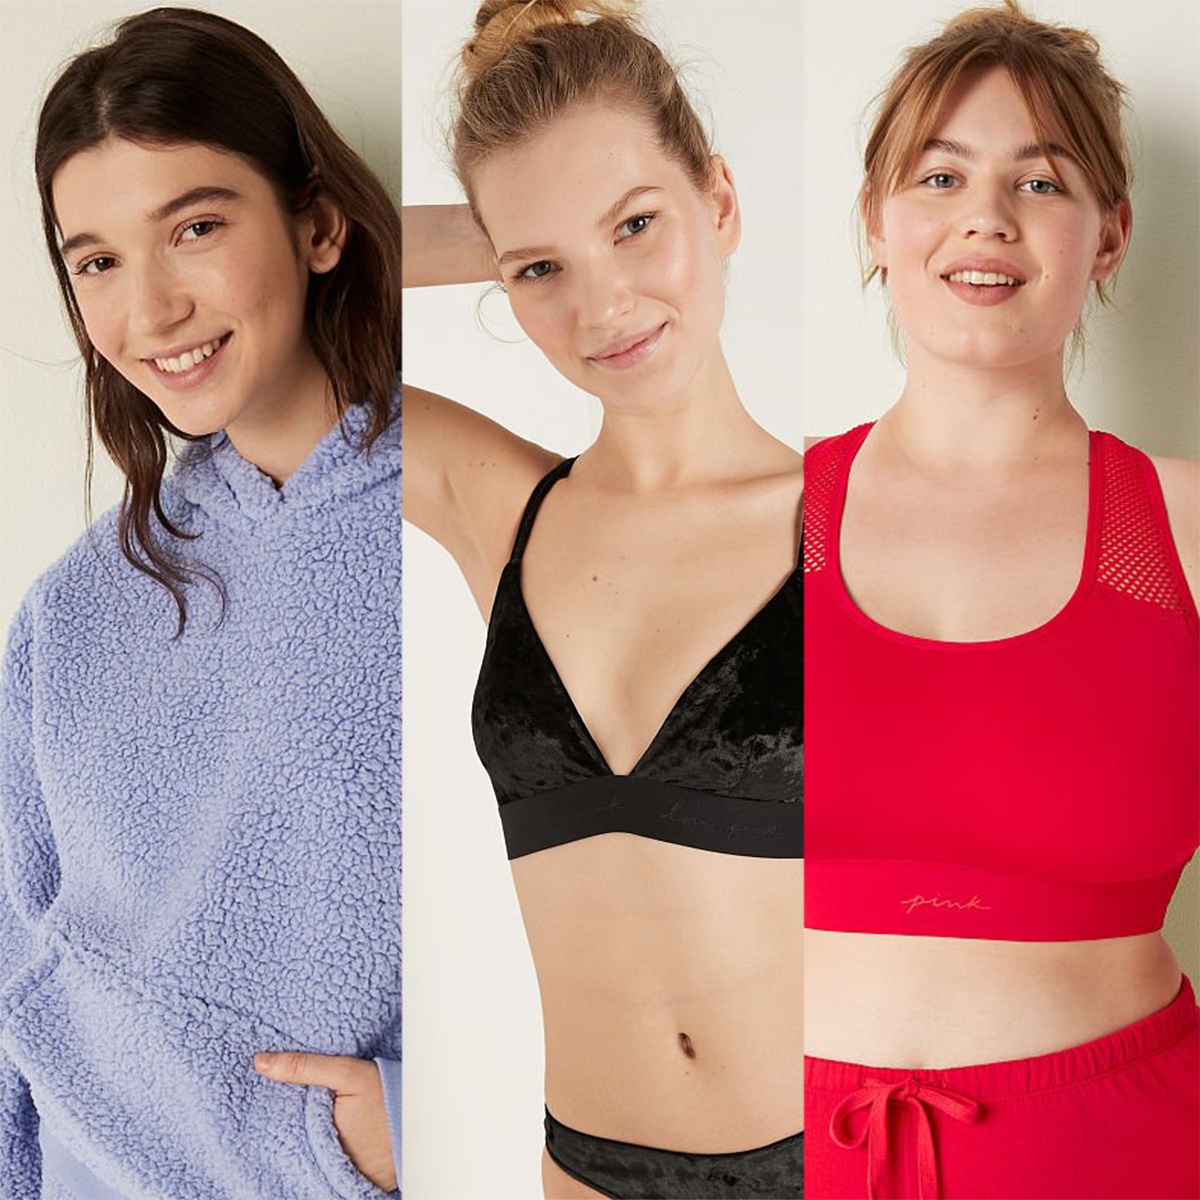 Victoria's Secret Pink 50% Off: Shop These 11 Styles Starting At $5